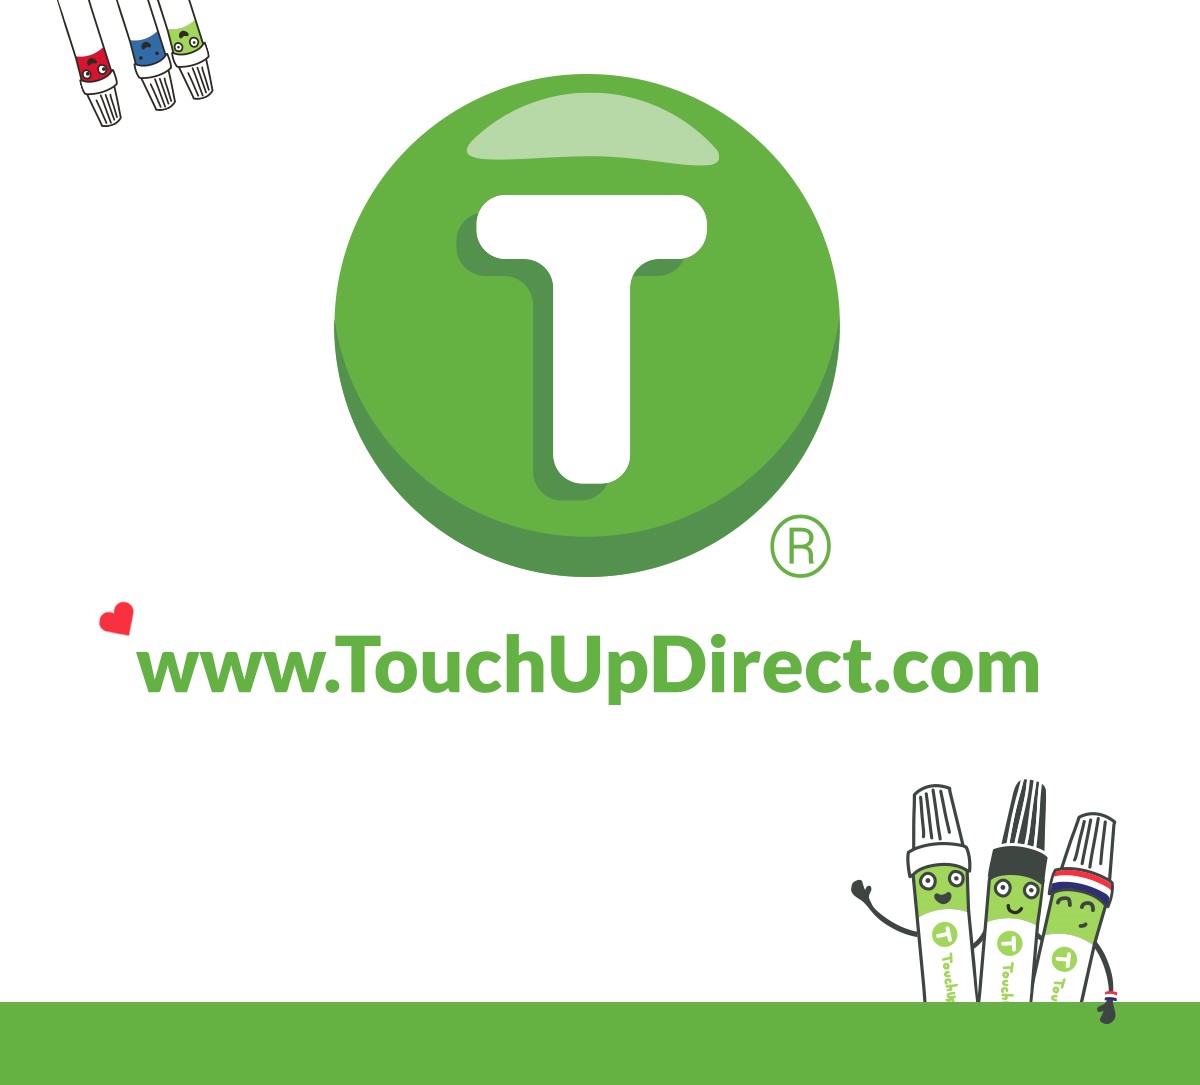 Touch Up Direct - Logo